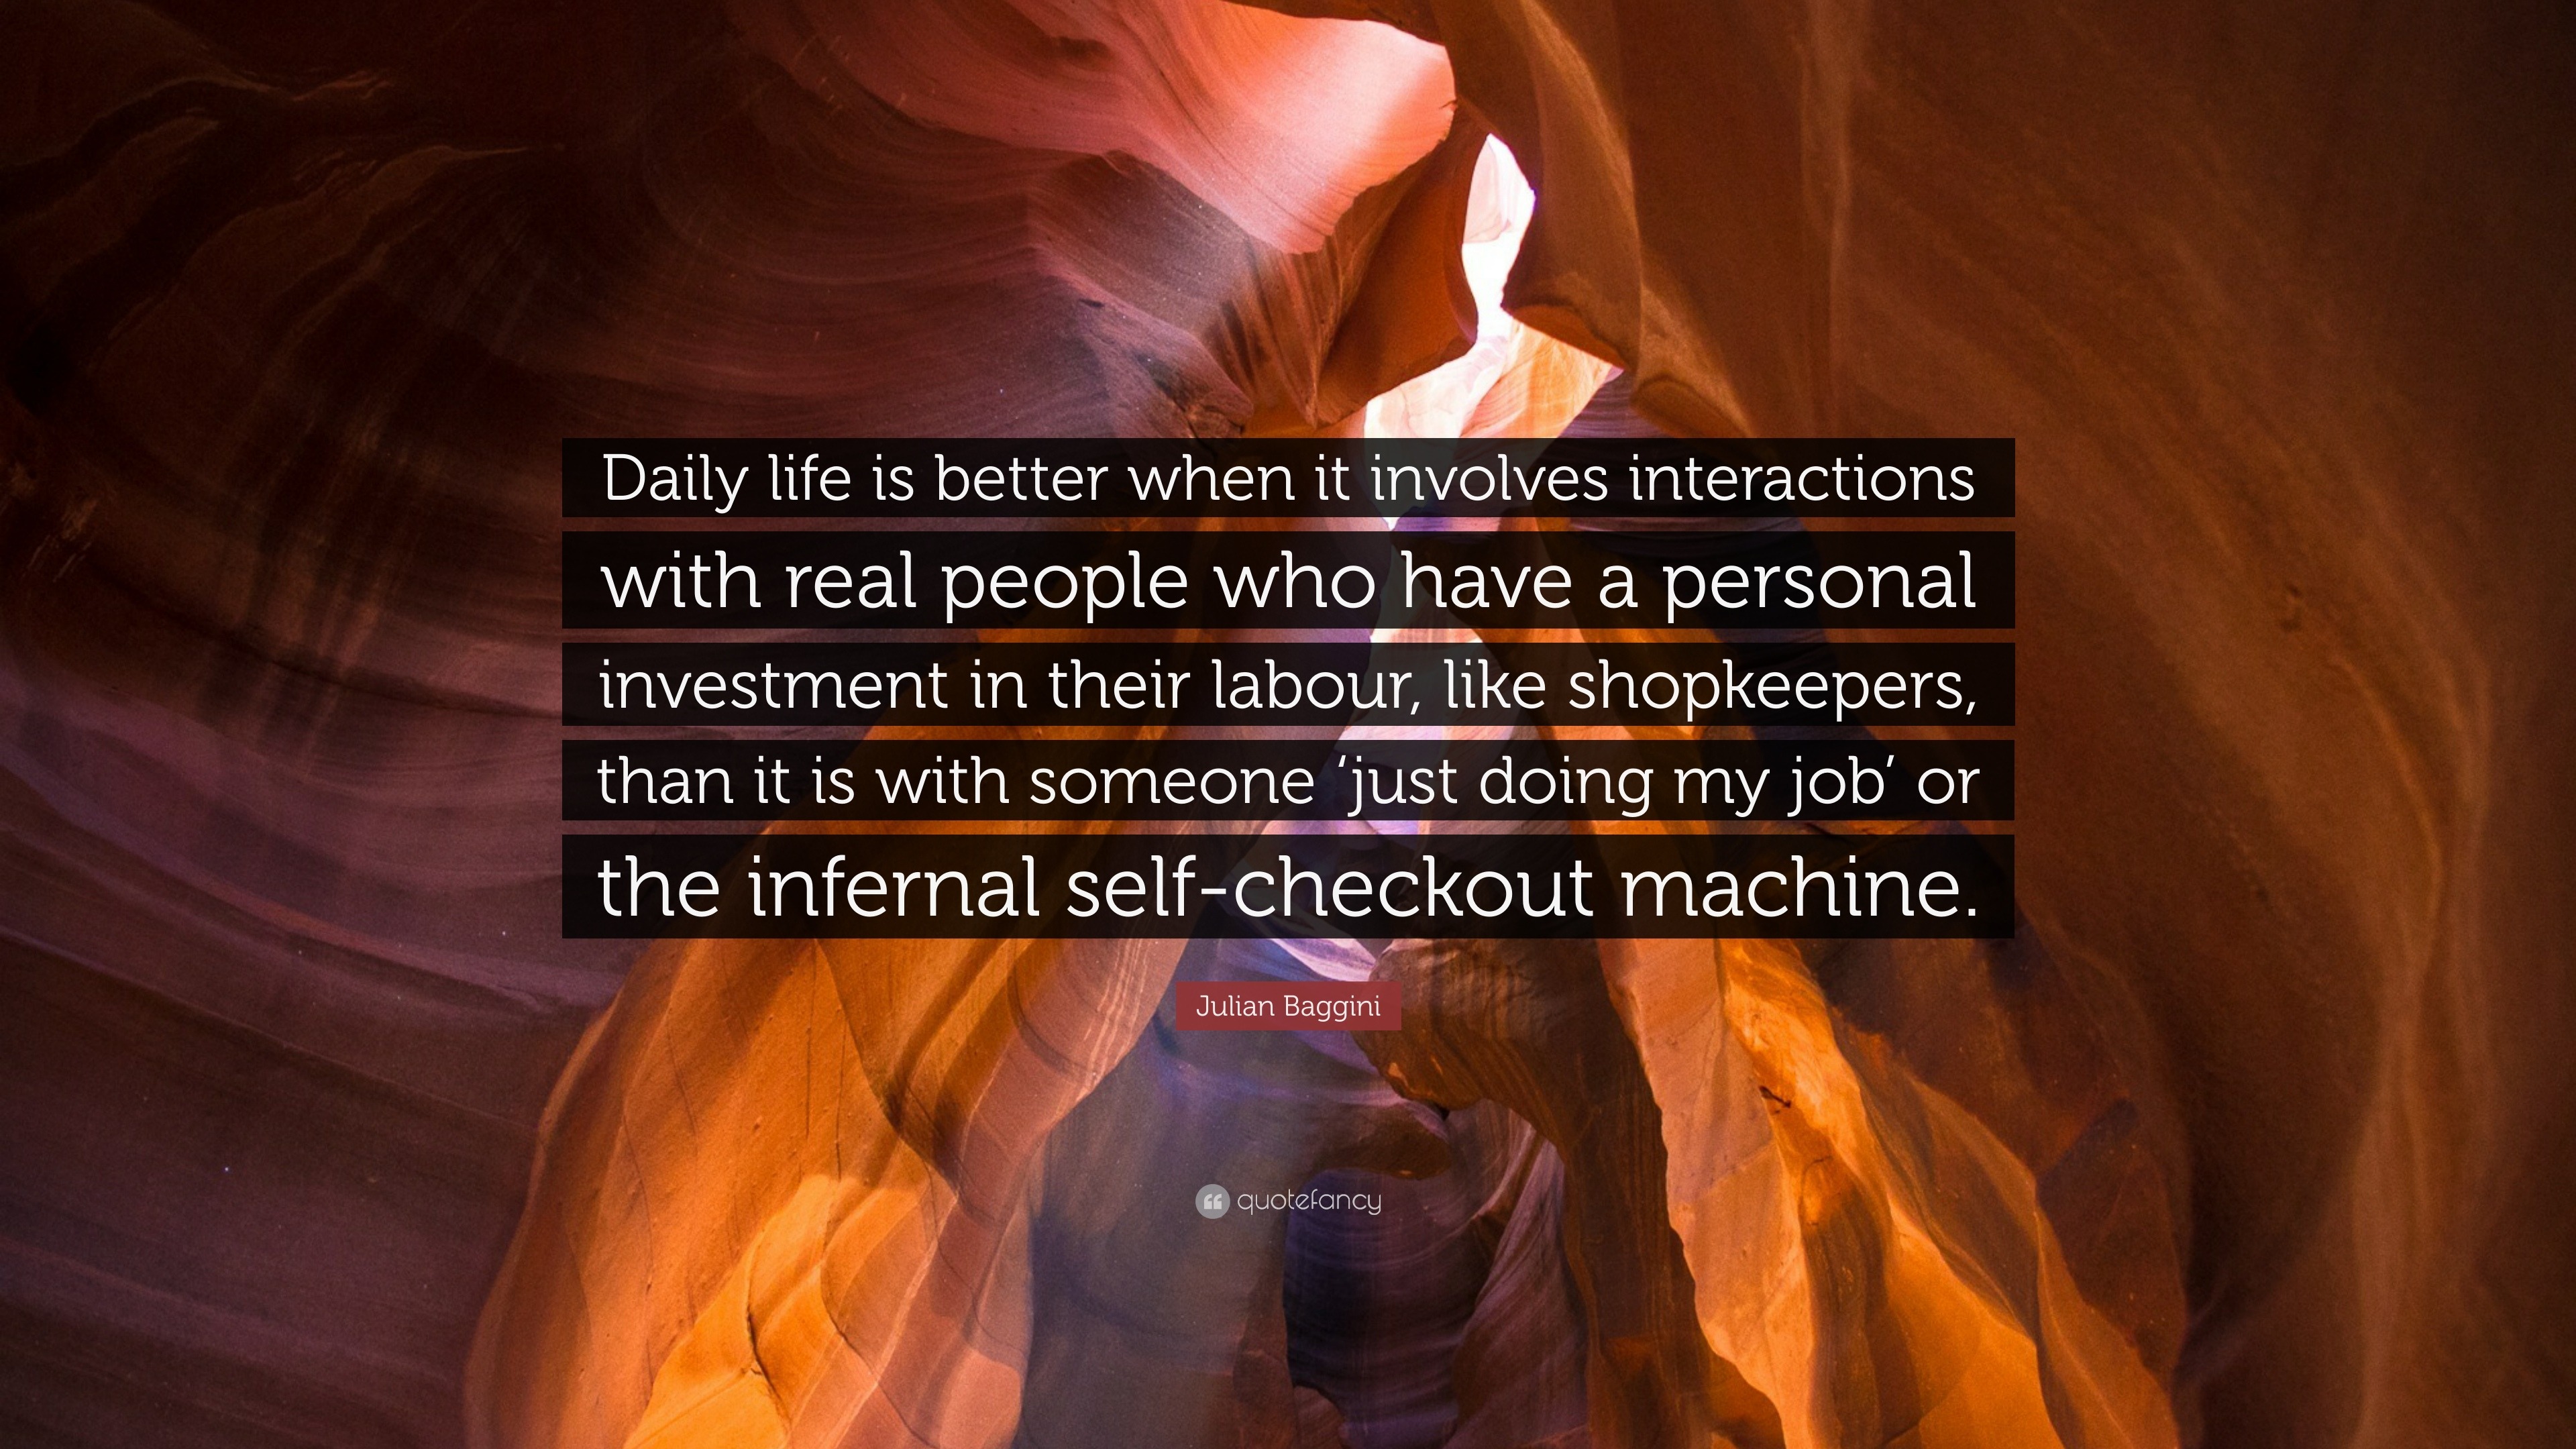 Julian Baggini Quote: “Daily life is better when it involves interactions  with real people who have a personal investment in their labour, like”